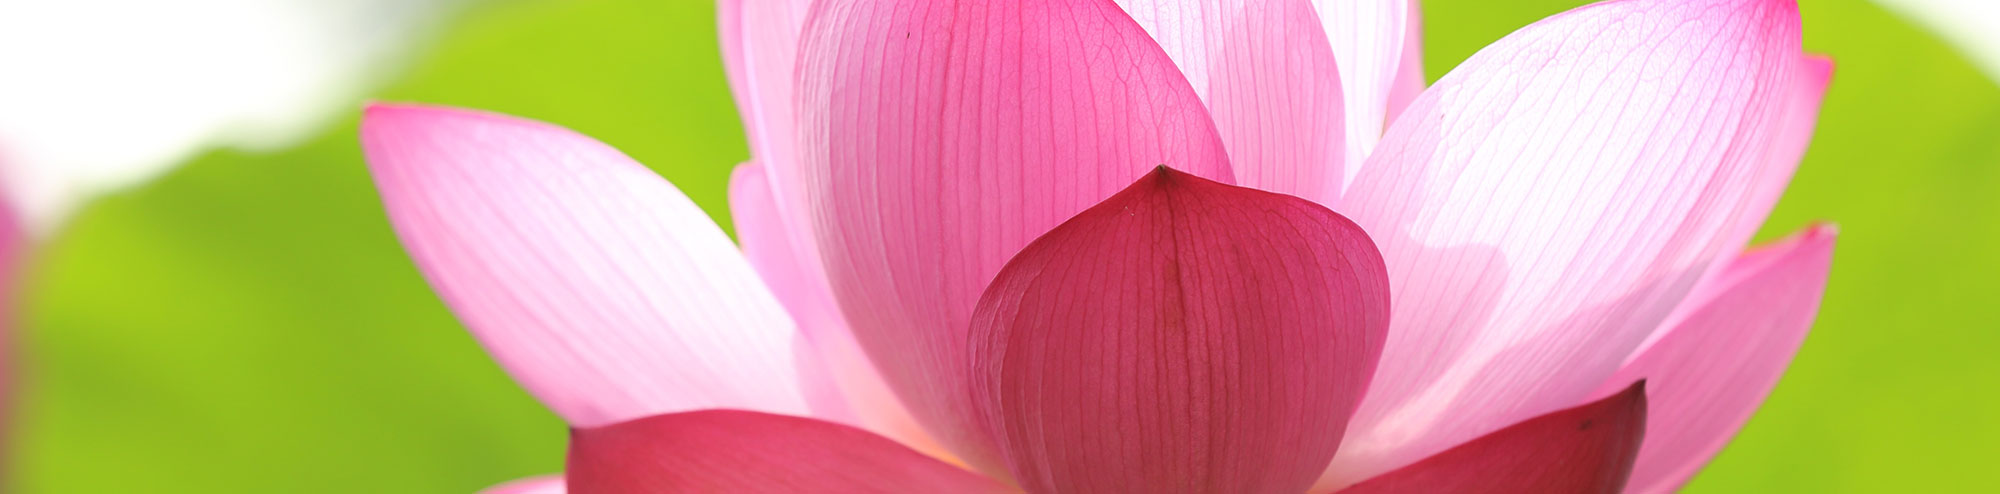 picture of a pink flower